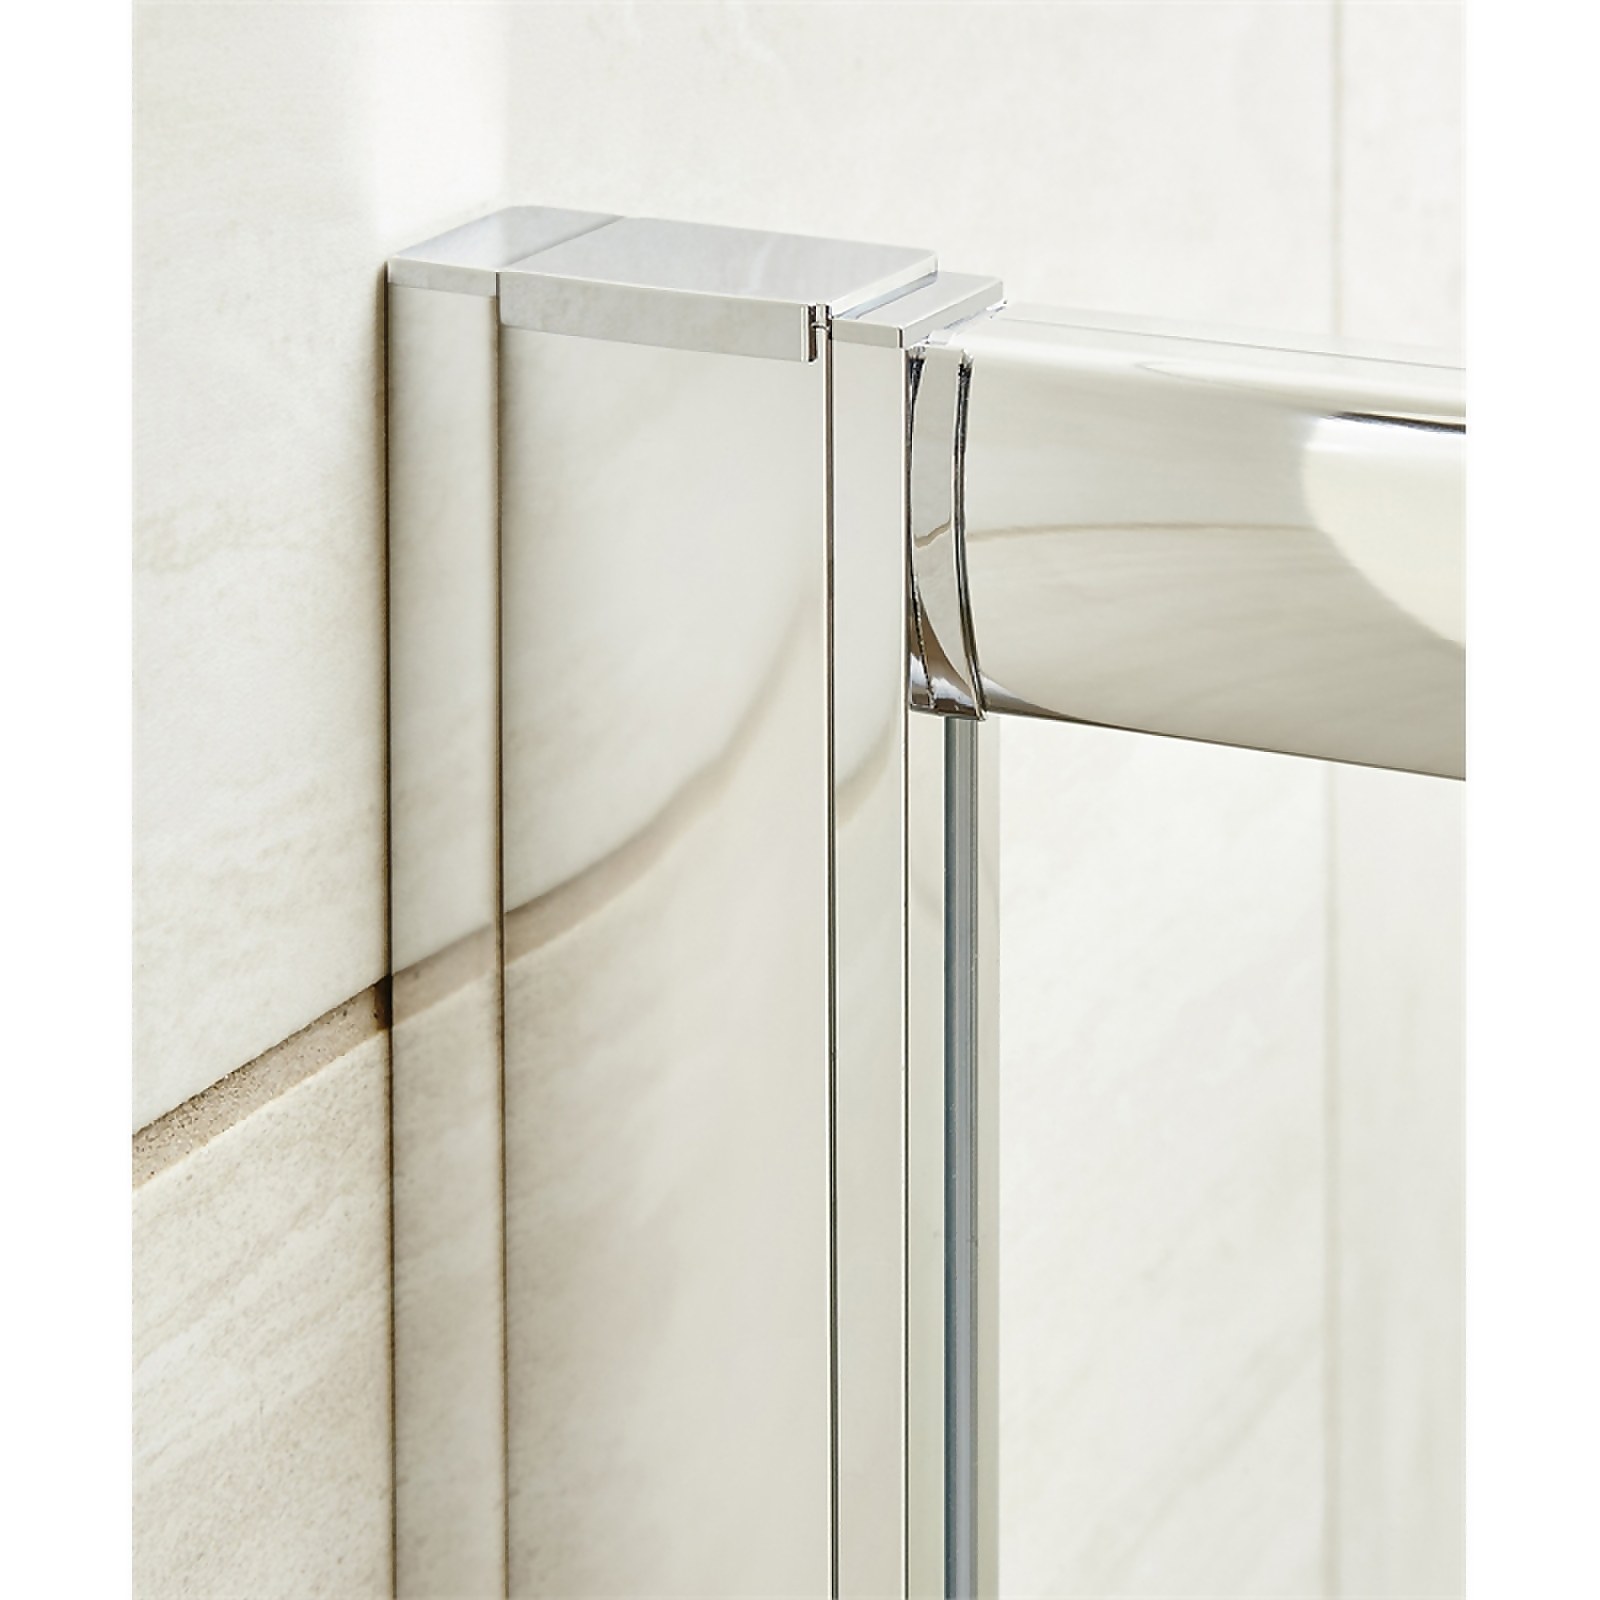 Photo of Balterley Shower Enclosure Profile Extension Kit - 1850mm